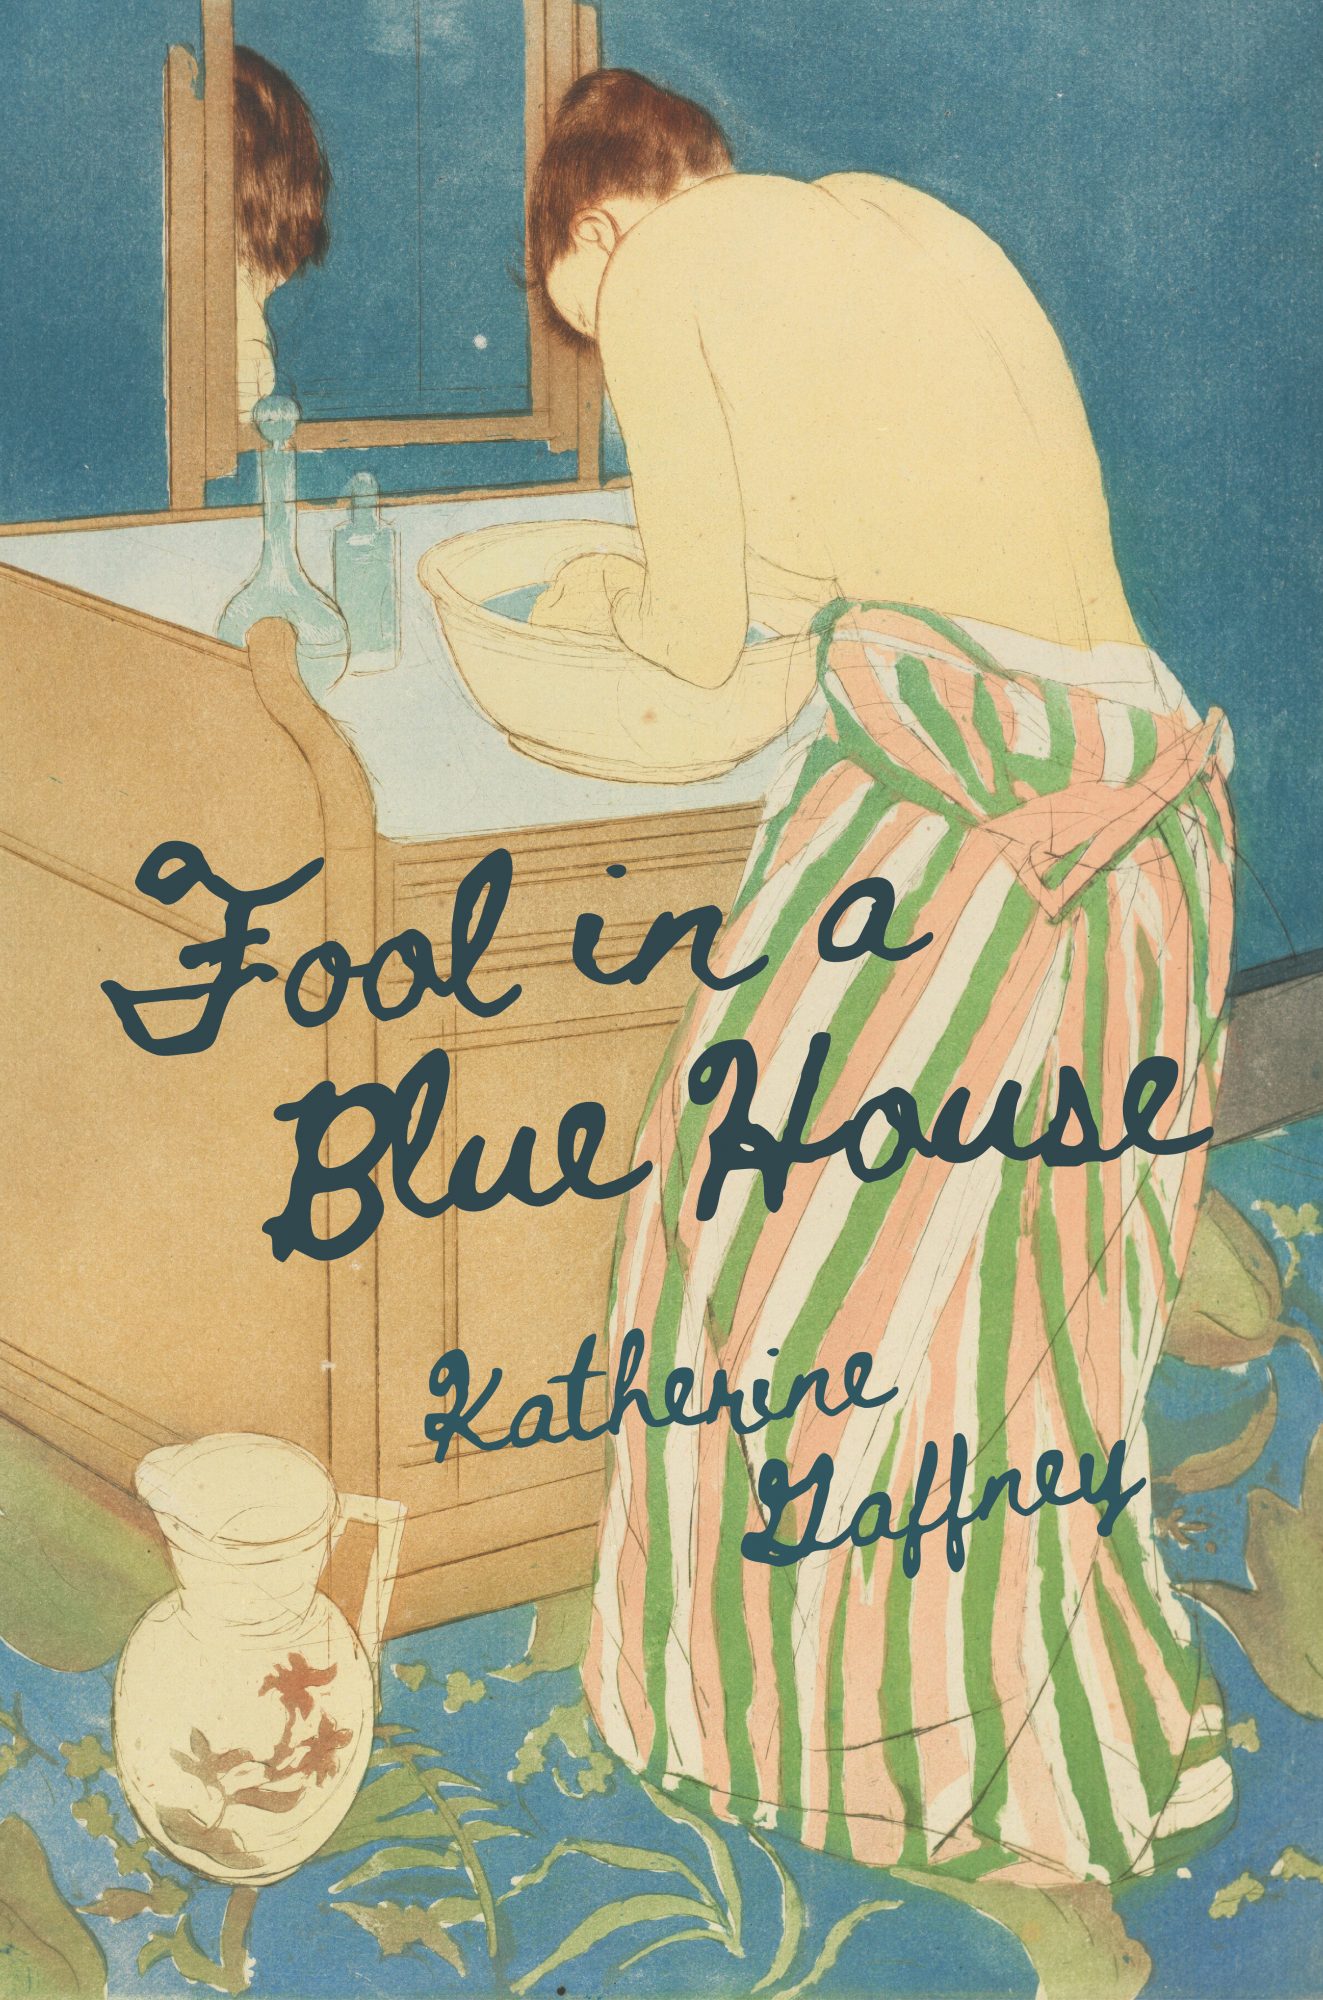 Image of the front cover of Fool in a Blue House.